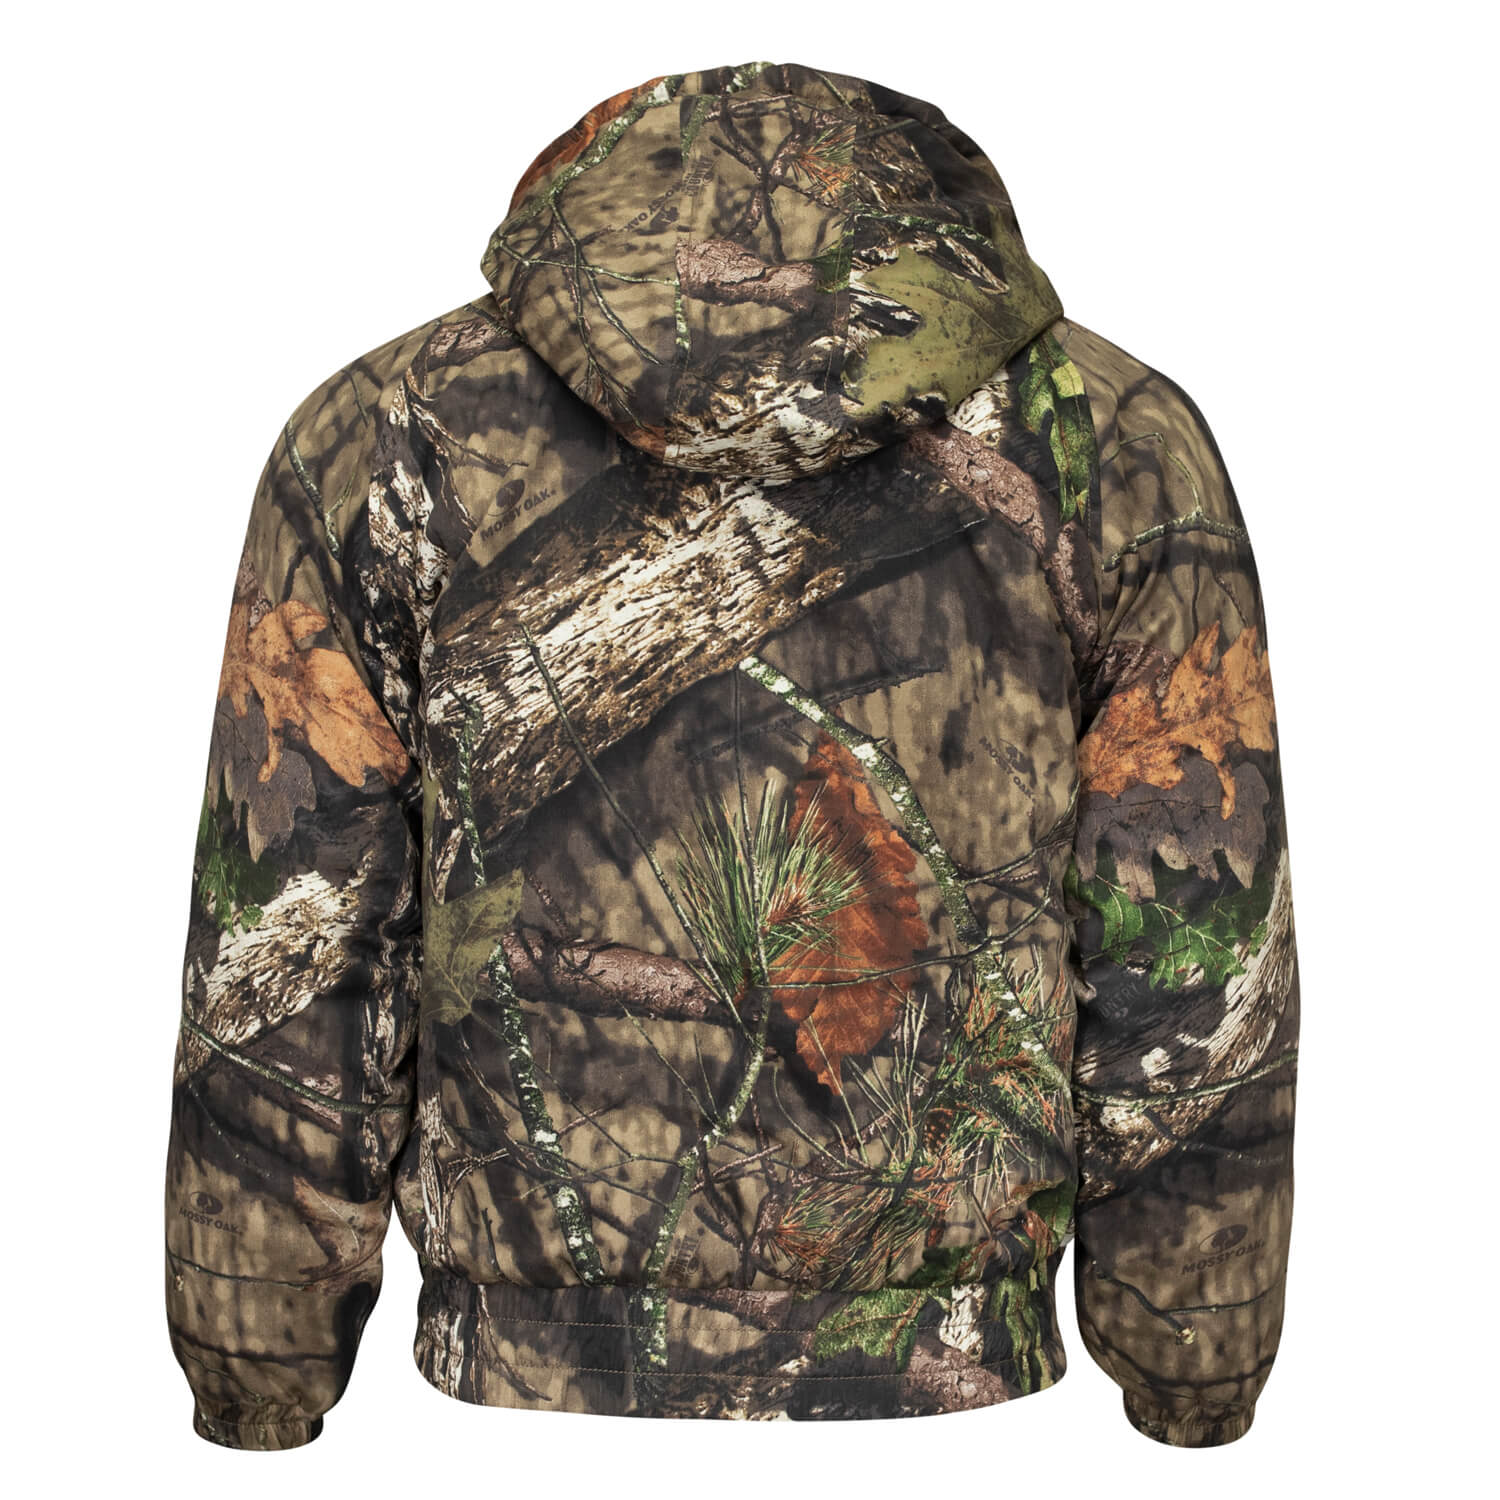 Cotton Mill Insulated Jacket – The Mossy Oak Store